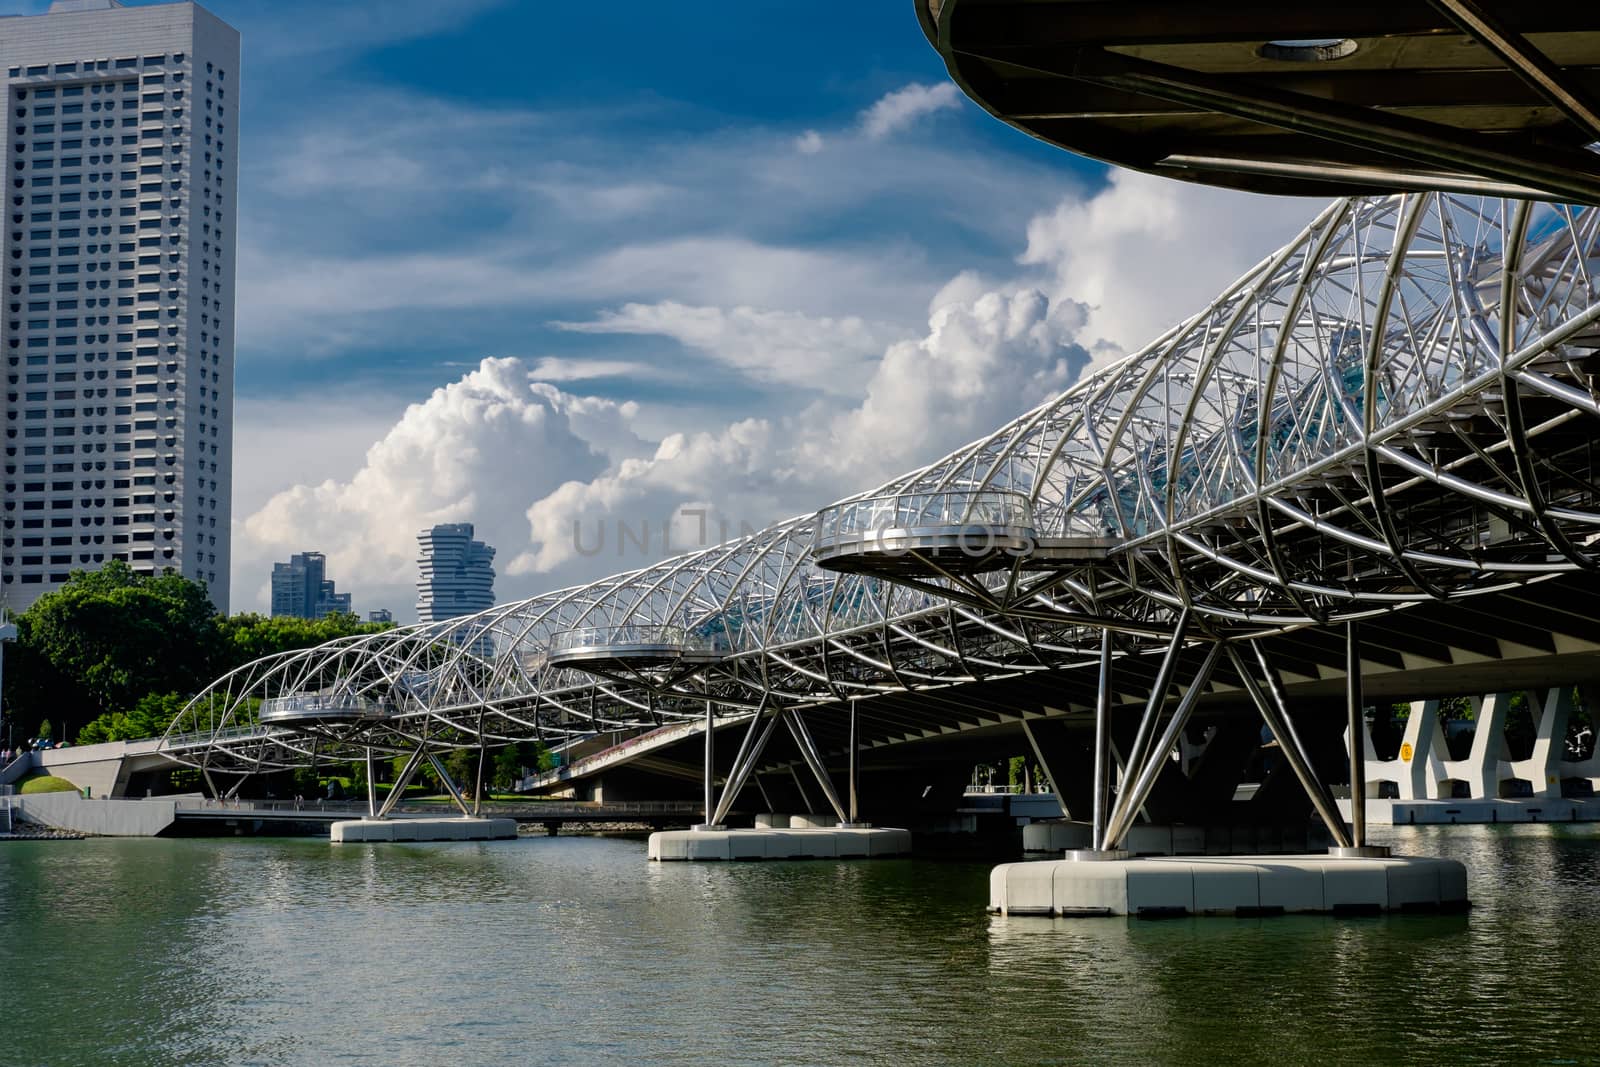 Helix Bridge at sunlight with clouds in the background in Singapore